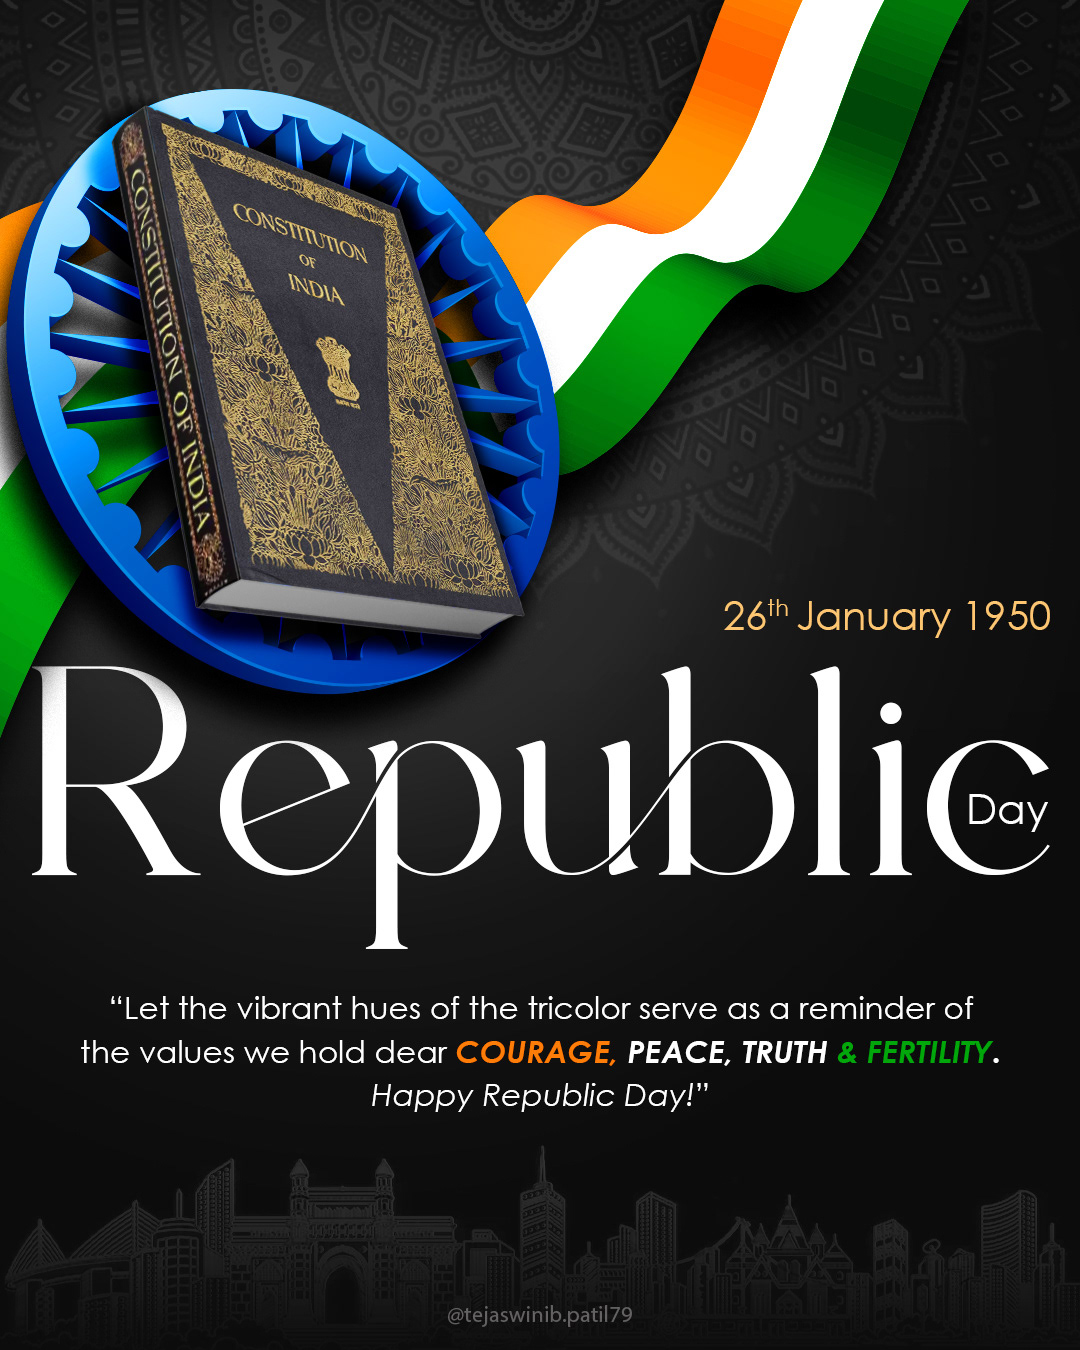 republic day Republic Day of INDIA India Constitution Social media post tricolor 26 january Satyamev jayate 26 January 1950 Constitution of India